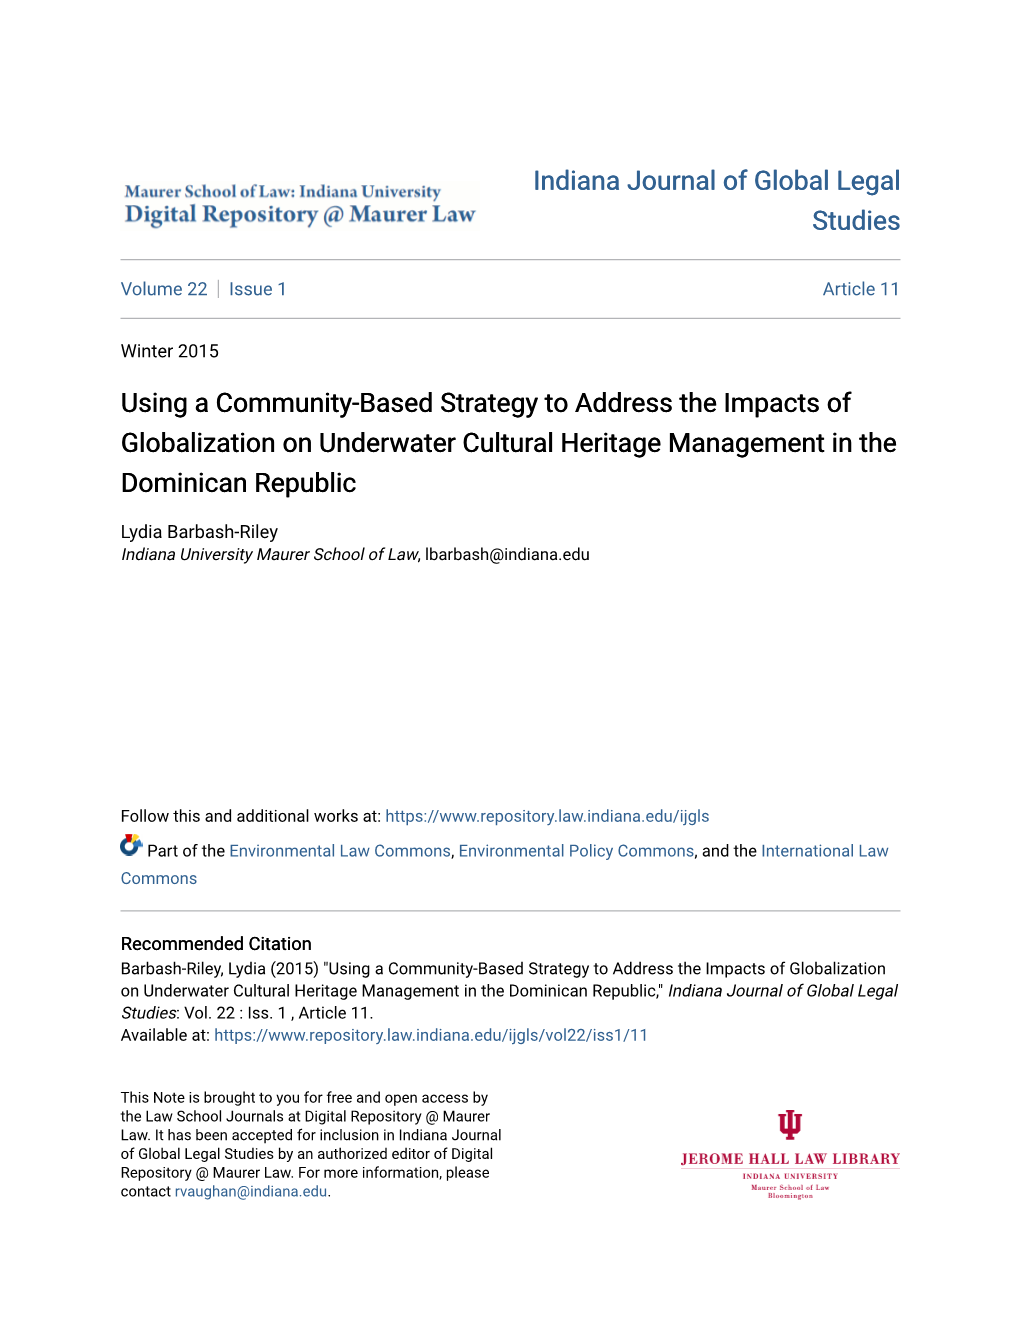 Using a Community-Based Strategy to Address the Impacts of Globalization on Underwater Cultural Heritage Management in the Dominican Republic